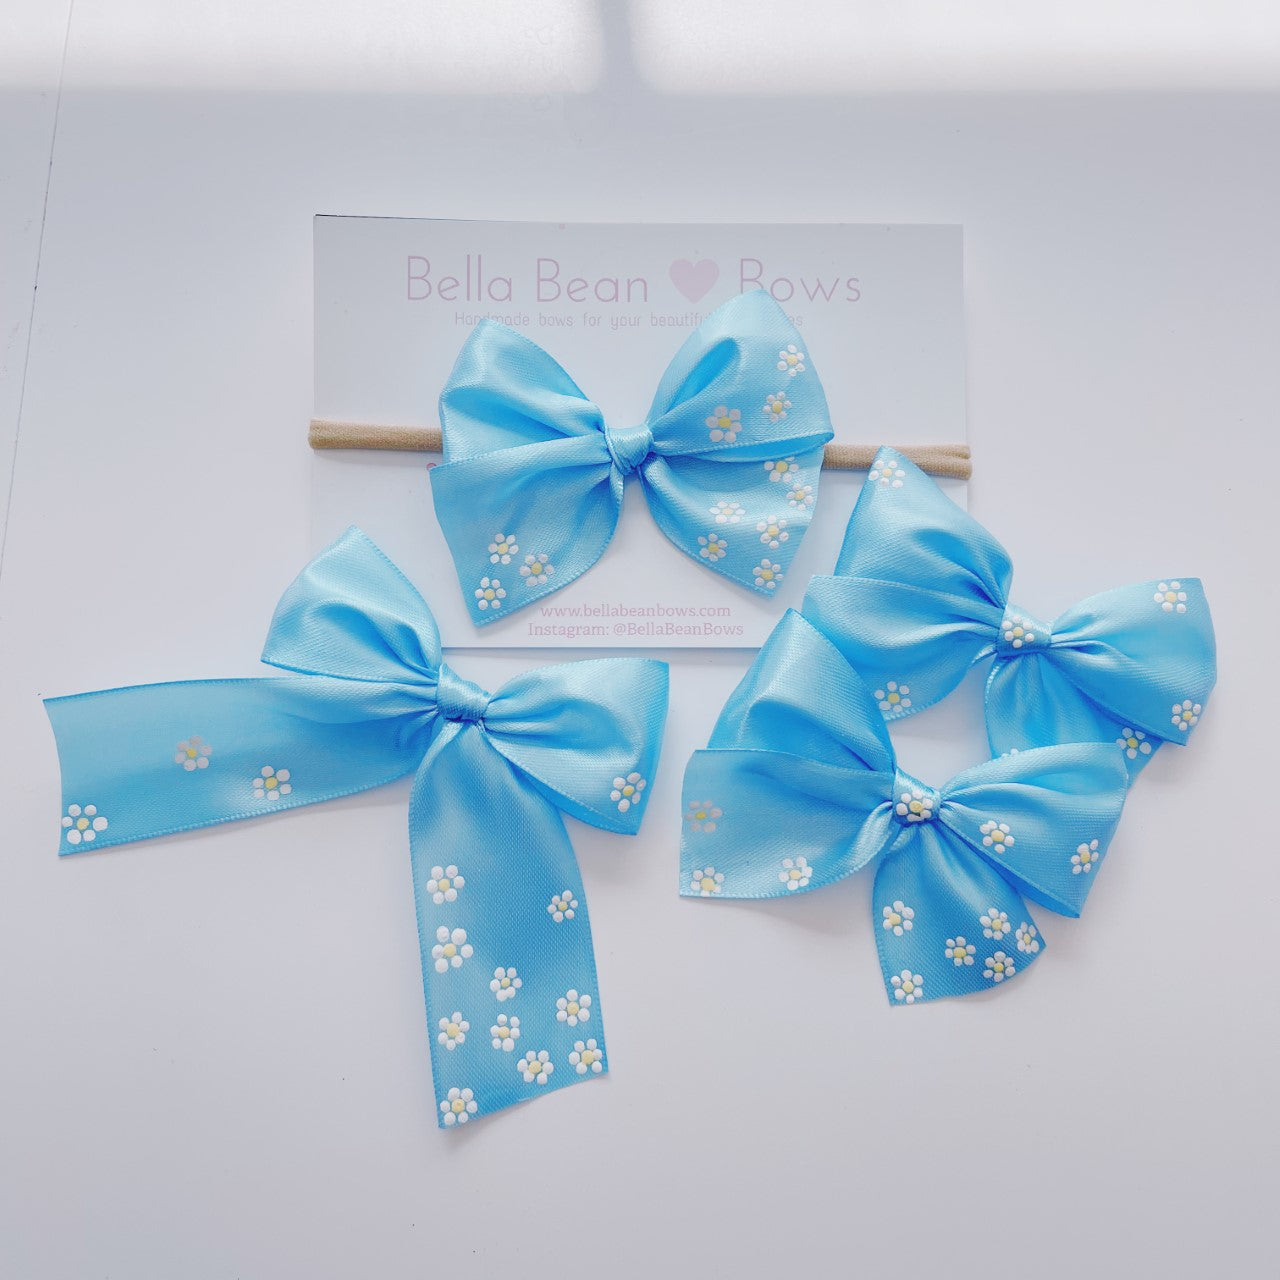 Satin Bow ~ 1.5" // Hand-painted Daisies // Blue-Jay